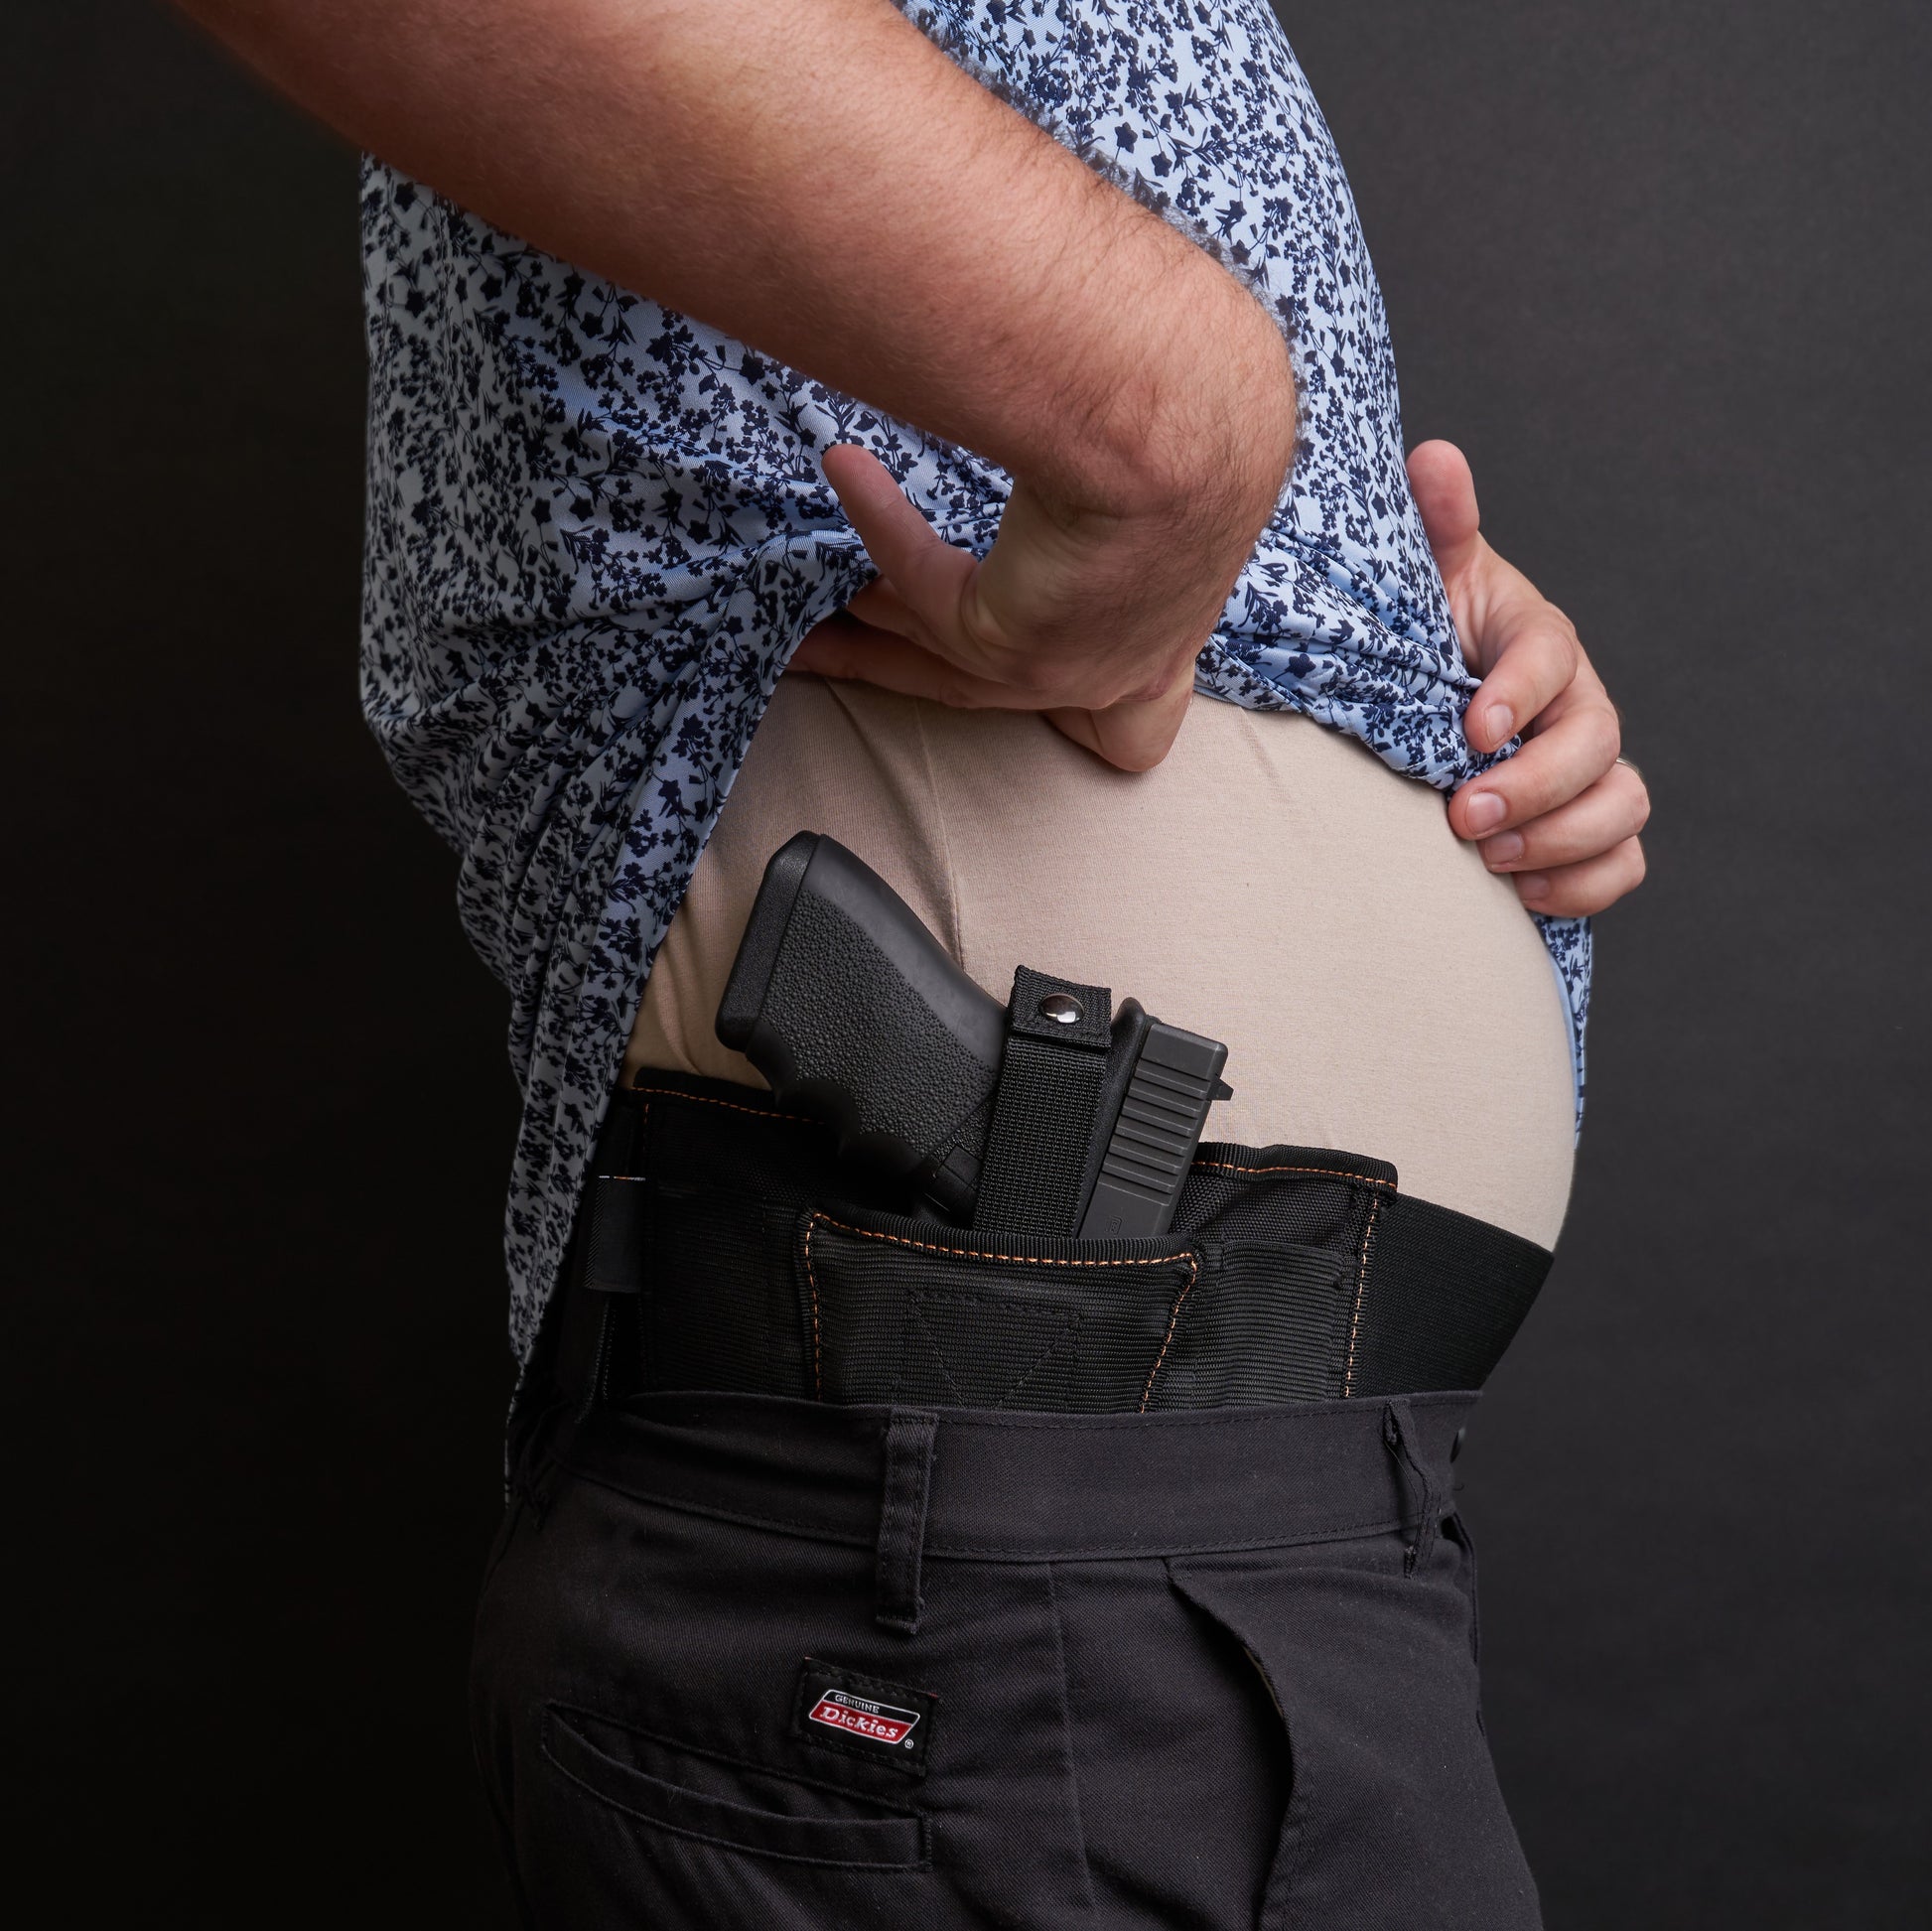 Side view of a man wearing the VNSH black waist belt extender 20 inches attached to the VNSH black Holster with a gun in it